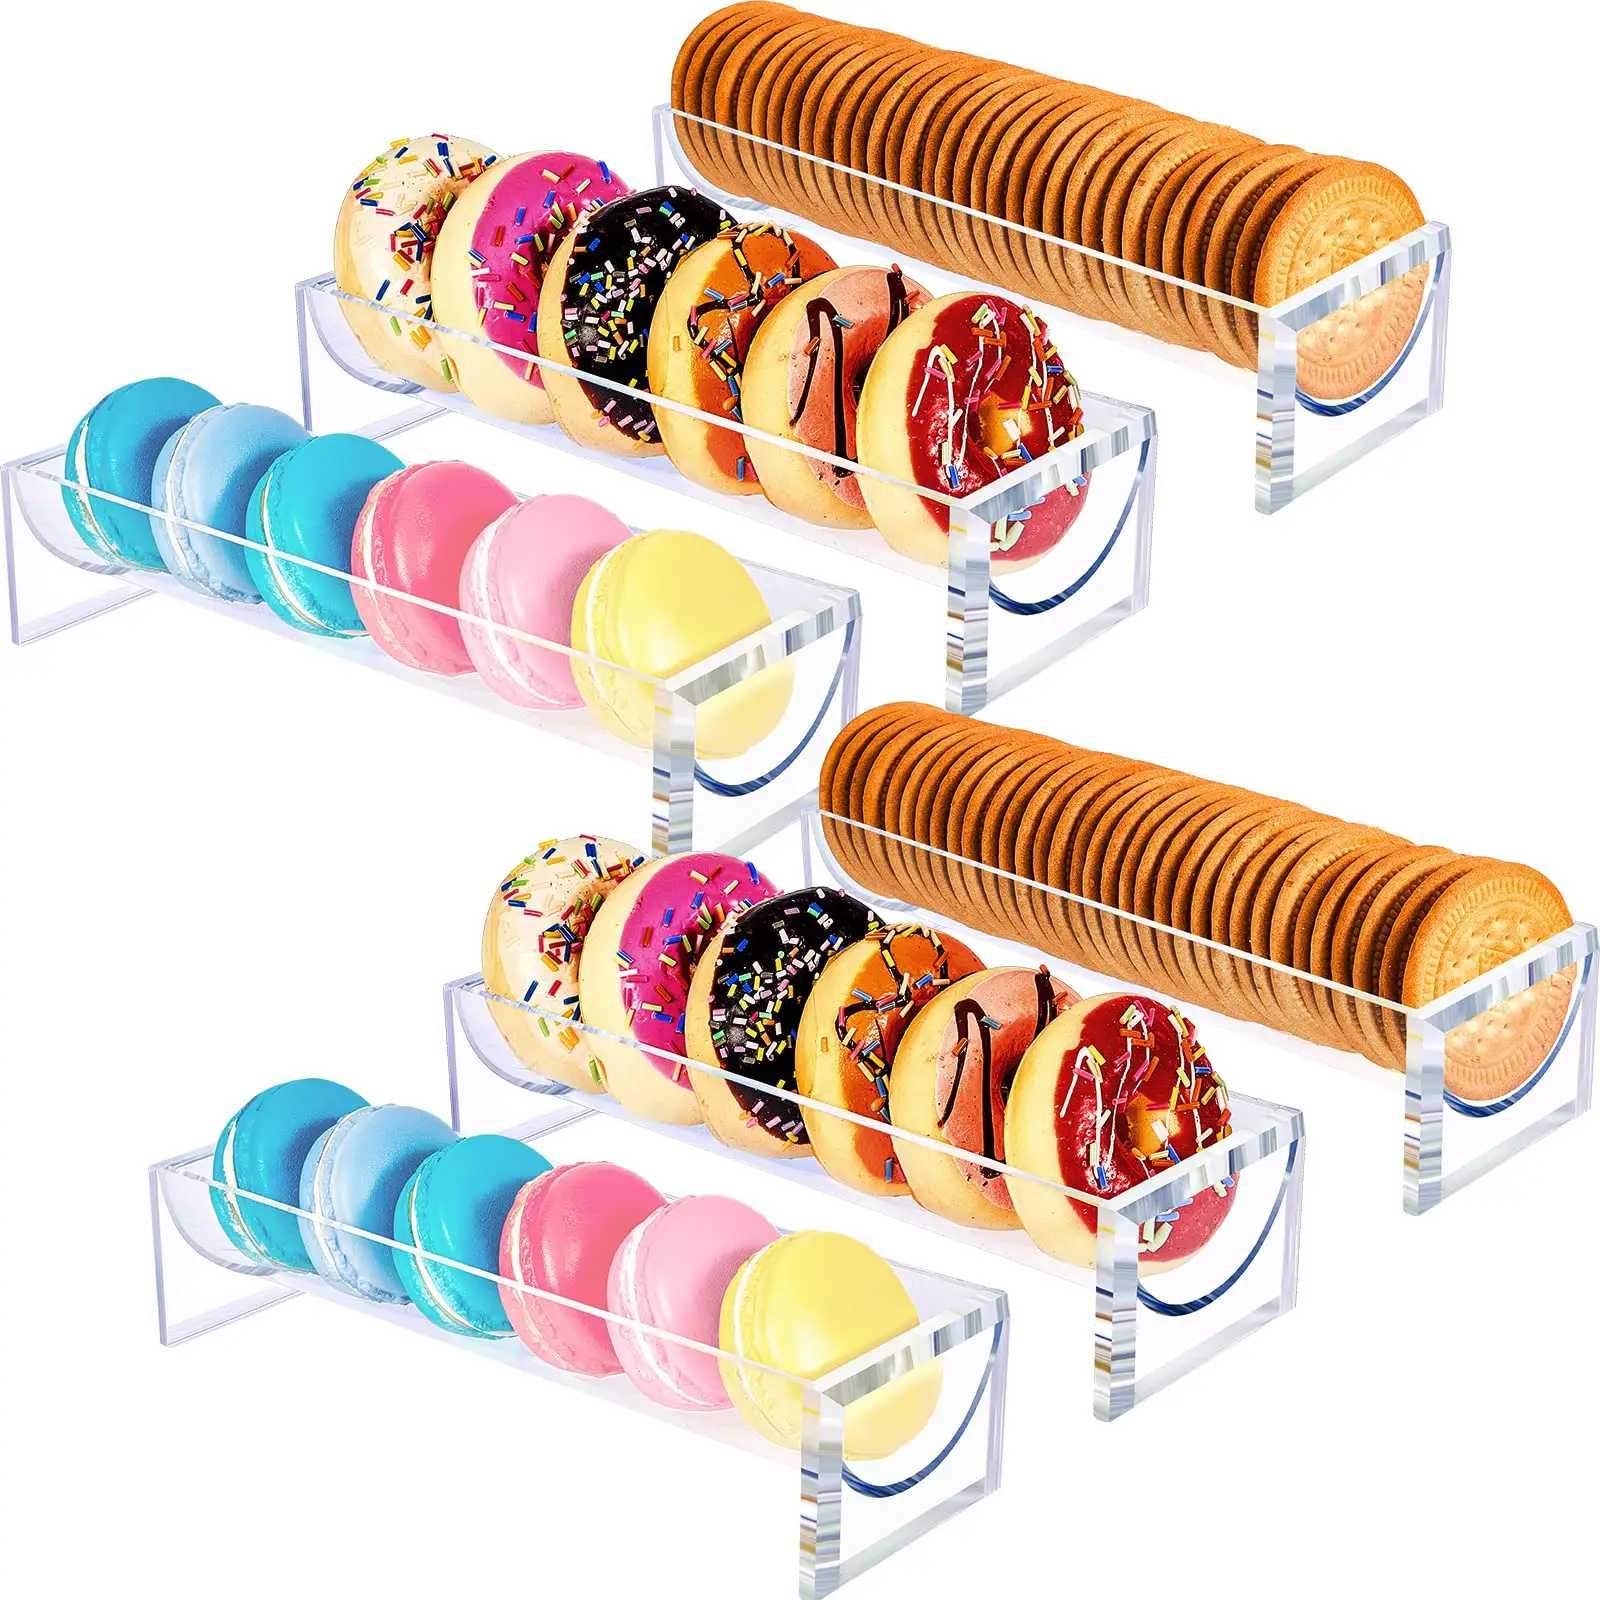 Hot Sell Custom Elegant Tabletop Multi Tiers Lucite Cookies Display Tray Acrylic Macaroon Tray Bakery Display Stand